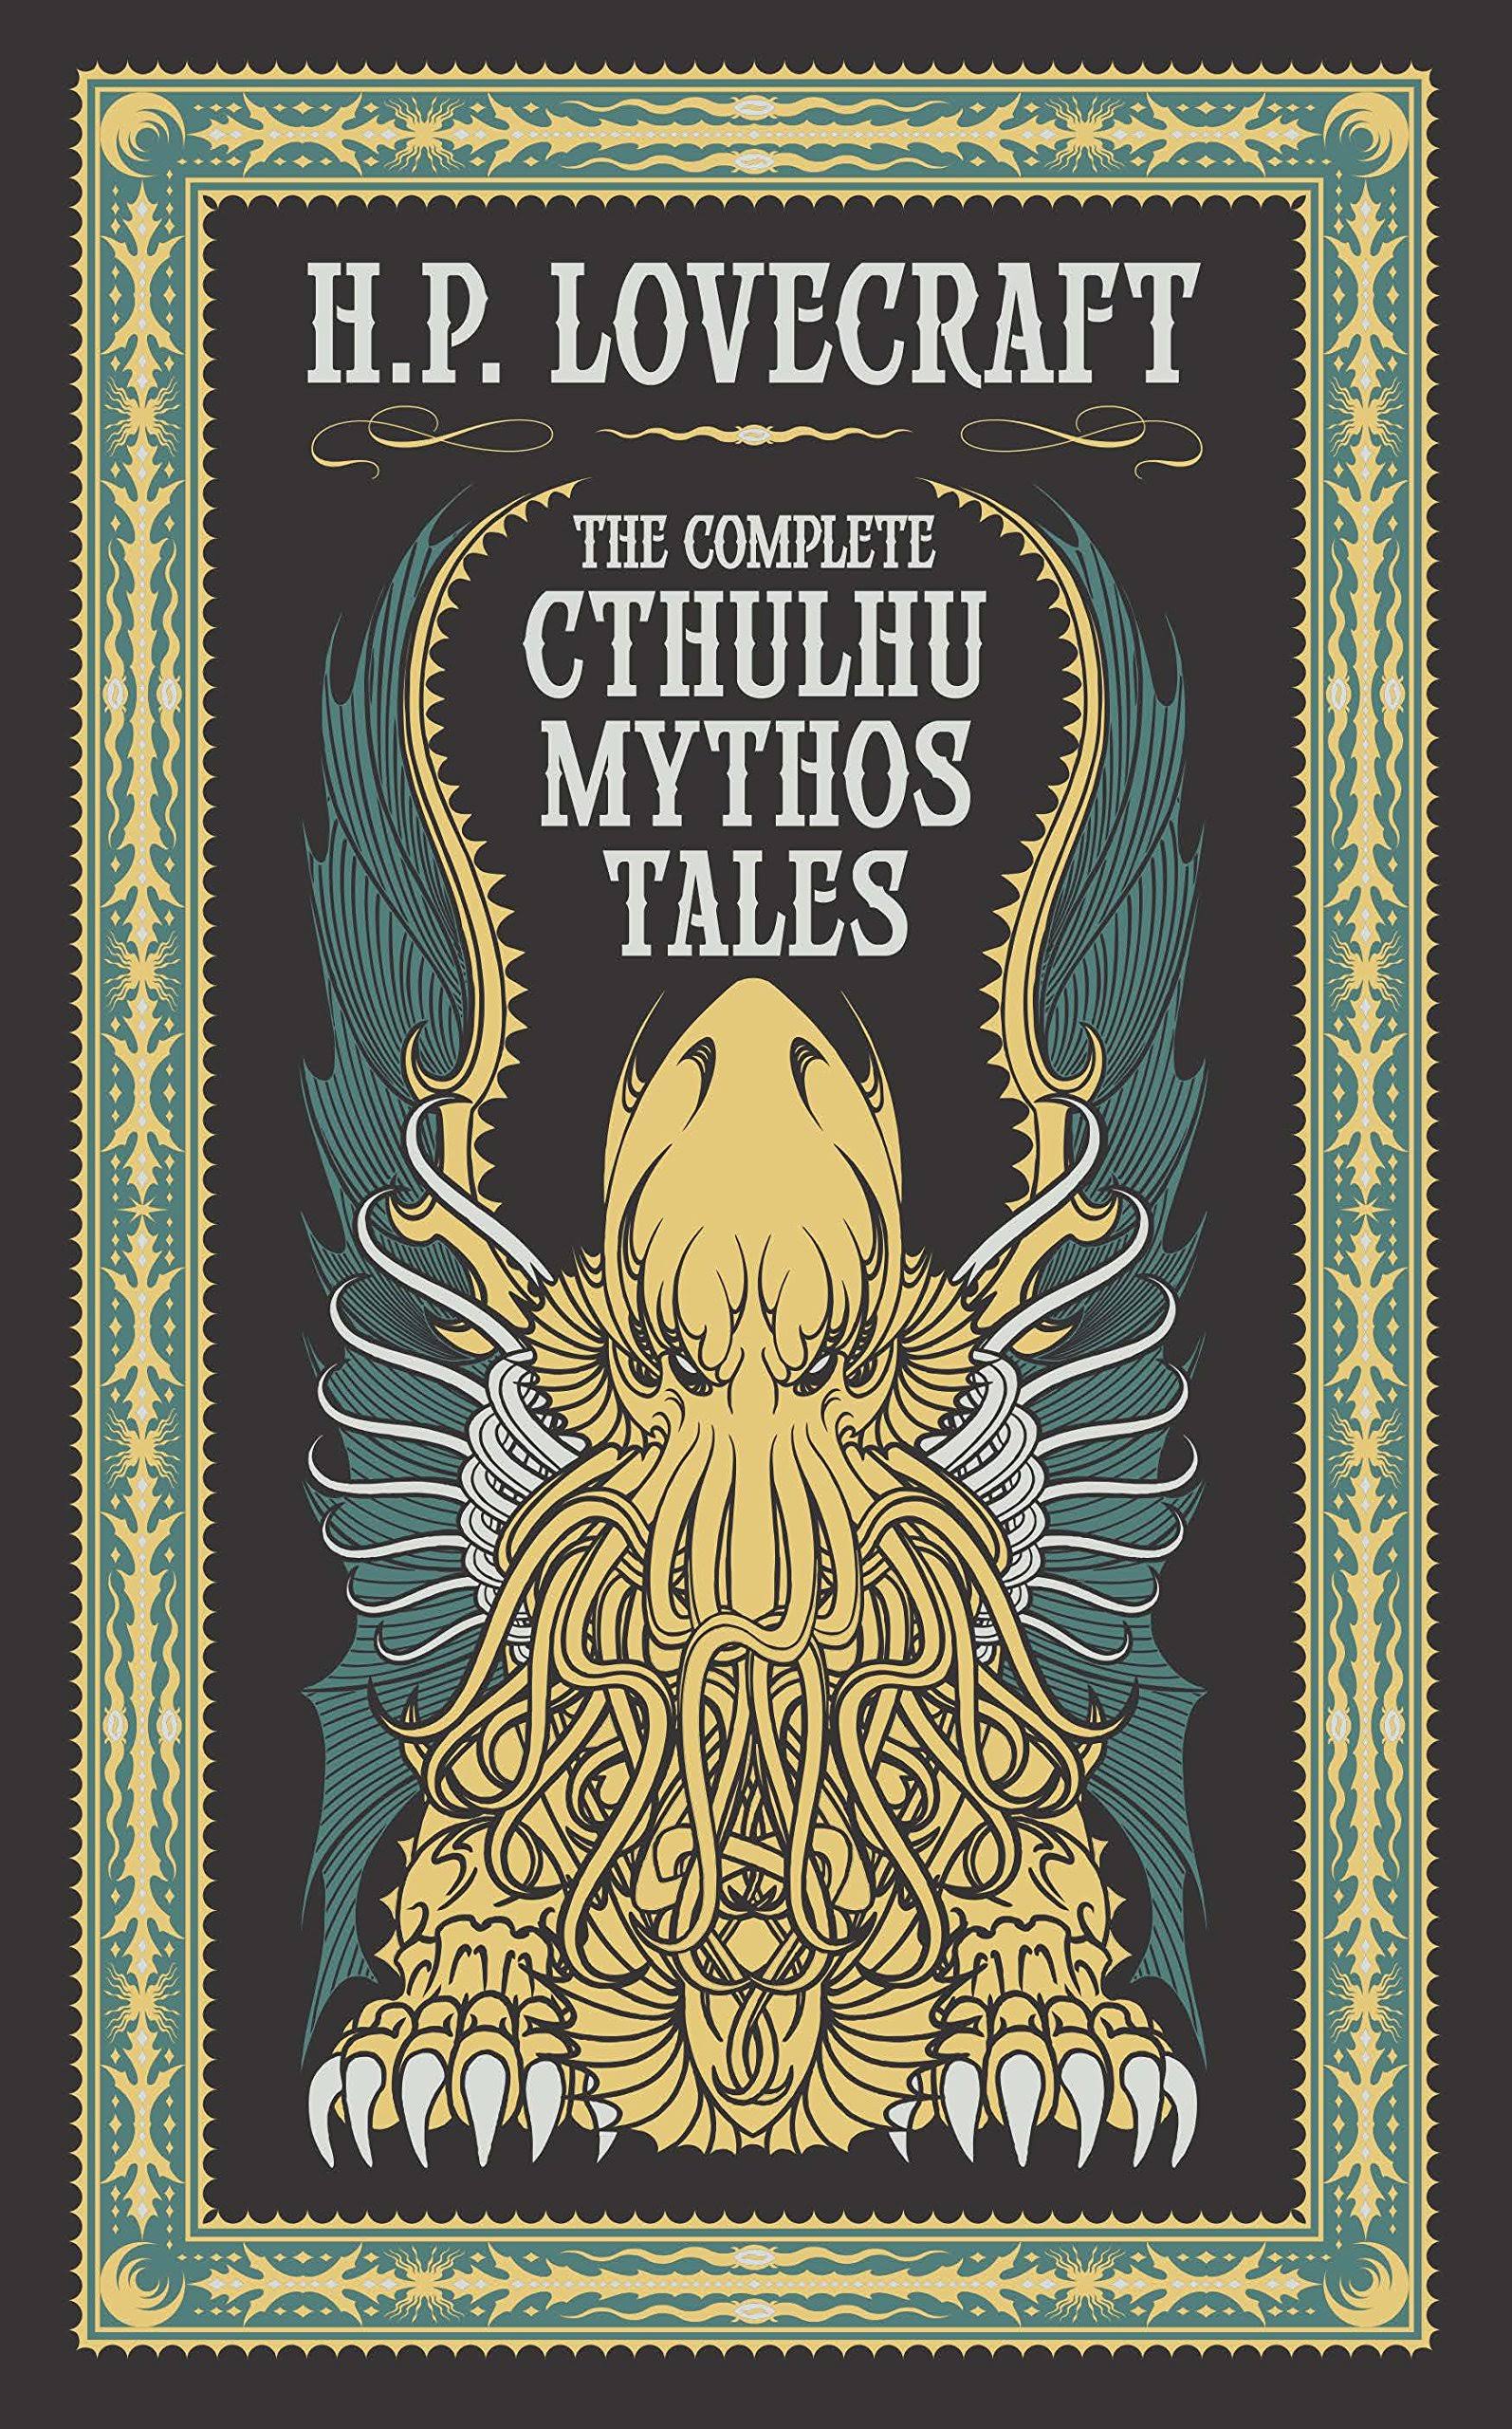 The Complete Cthulhu Mythos Tales [Book]